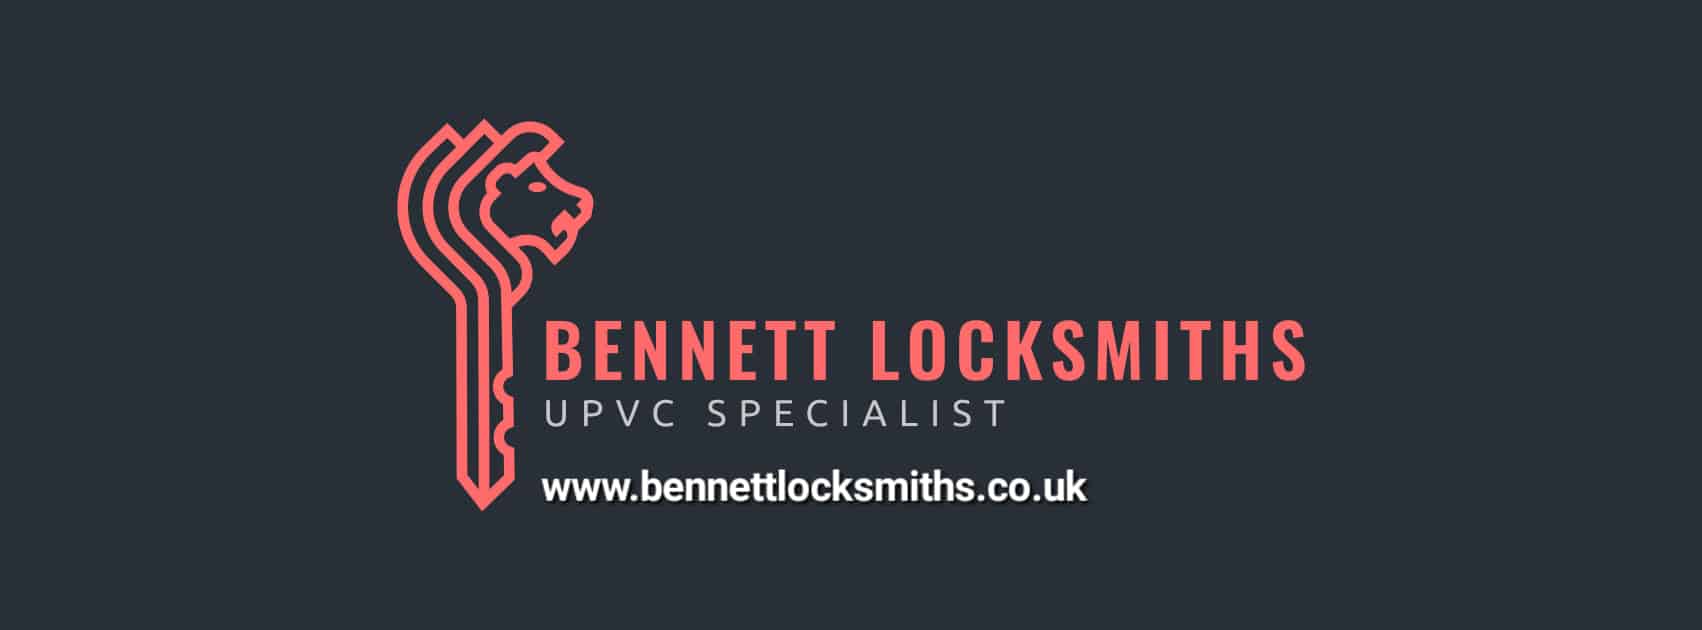 Bennett Locksmiths - Fast Reliable and Transparent 